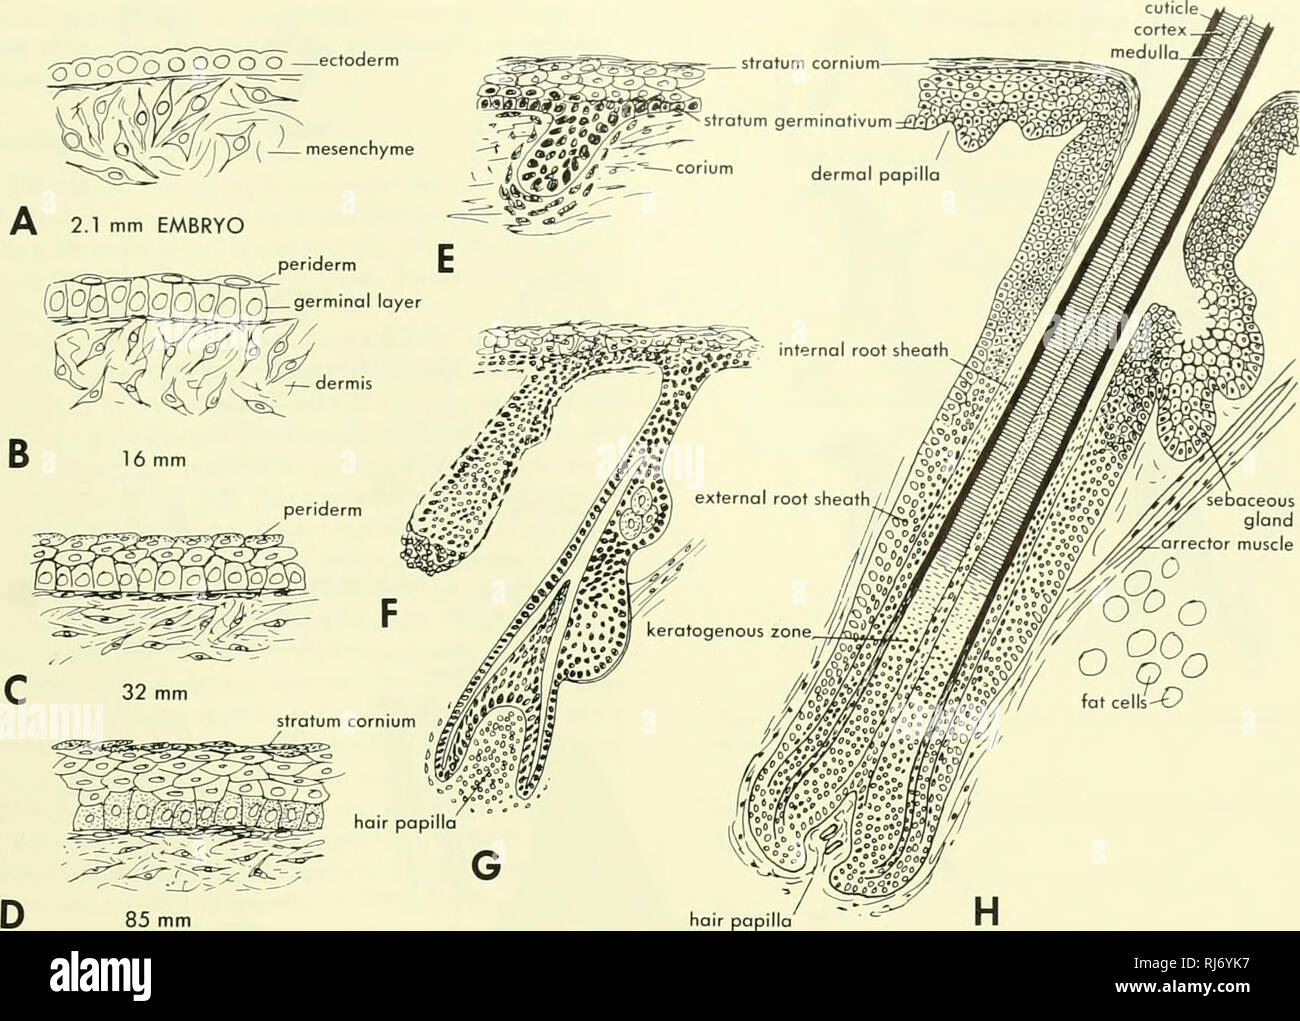 . Chordate morphology. Morphology (Animals); Chordata. Figure 8-3. Development of the human epidermis and hair follicle. A, epidermis of 2.1 -mm embryo; B, epidermis of 16-mm embryo; C, epidermis of 32-mm embryo; D, epidermis of 85-mm embryo; E to H, progressive stages in the development of the follicle and hair. (After Patten, 1946) of the snout. It is not strengthened by a bony core as in the cow but is seated on a bony knob of the skull. The pointed tip is produced and maintained by wear. Bmbryological development The ectoderm is at first a simple cuboidal epithelium which gradually becomes Stock Photo